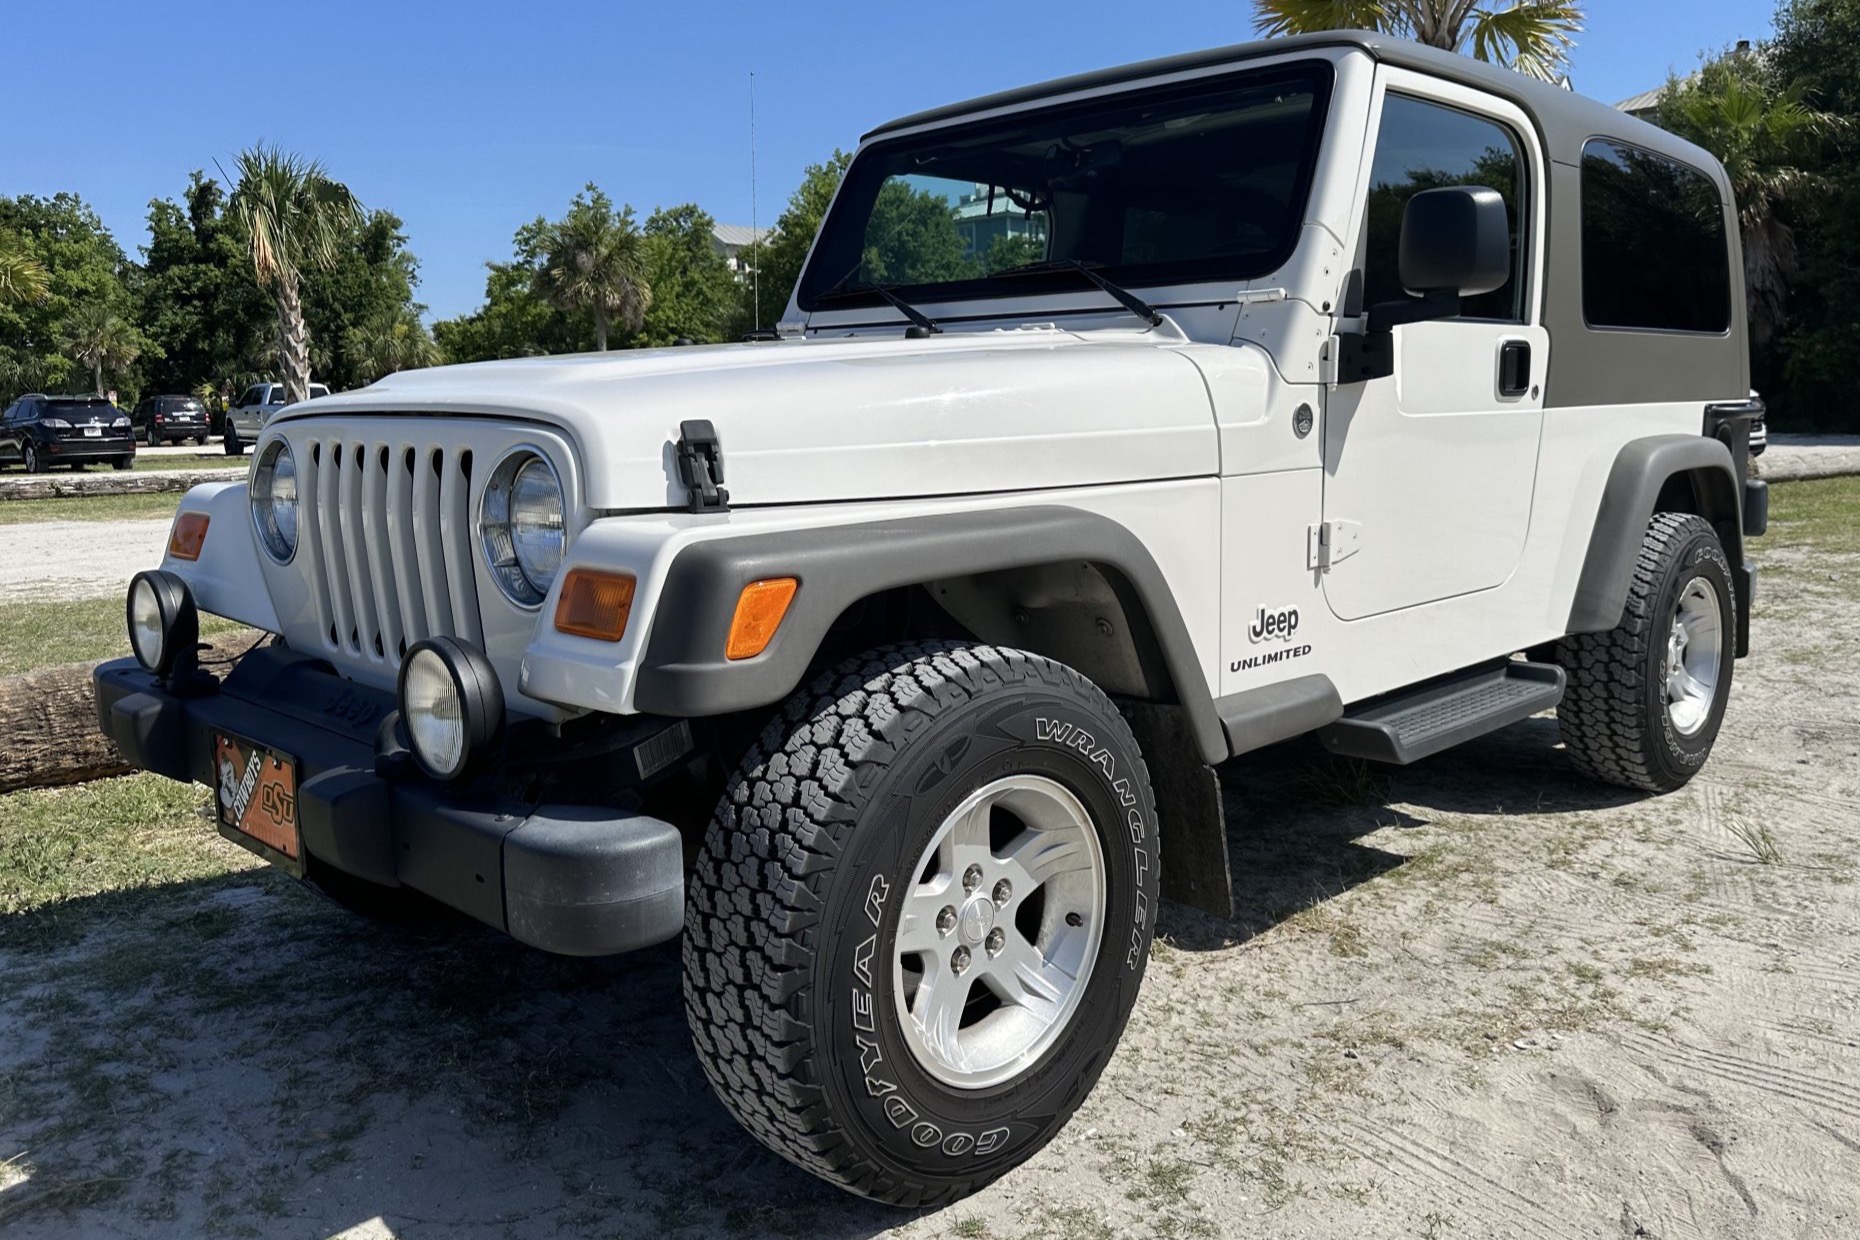 Used 37k-Mile 2005 Jeep Wrangler Unlimited Review